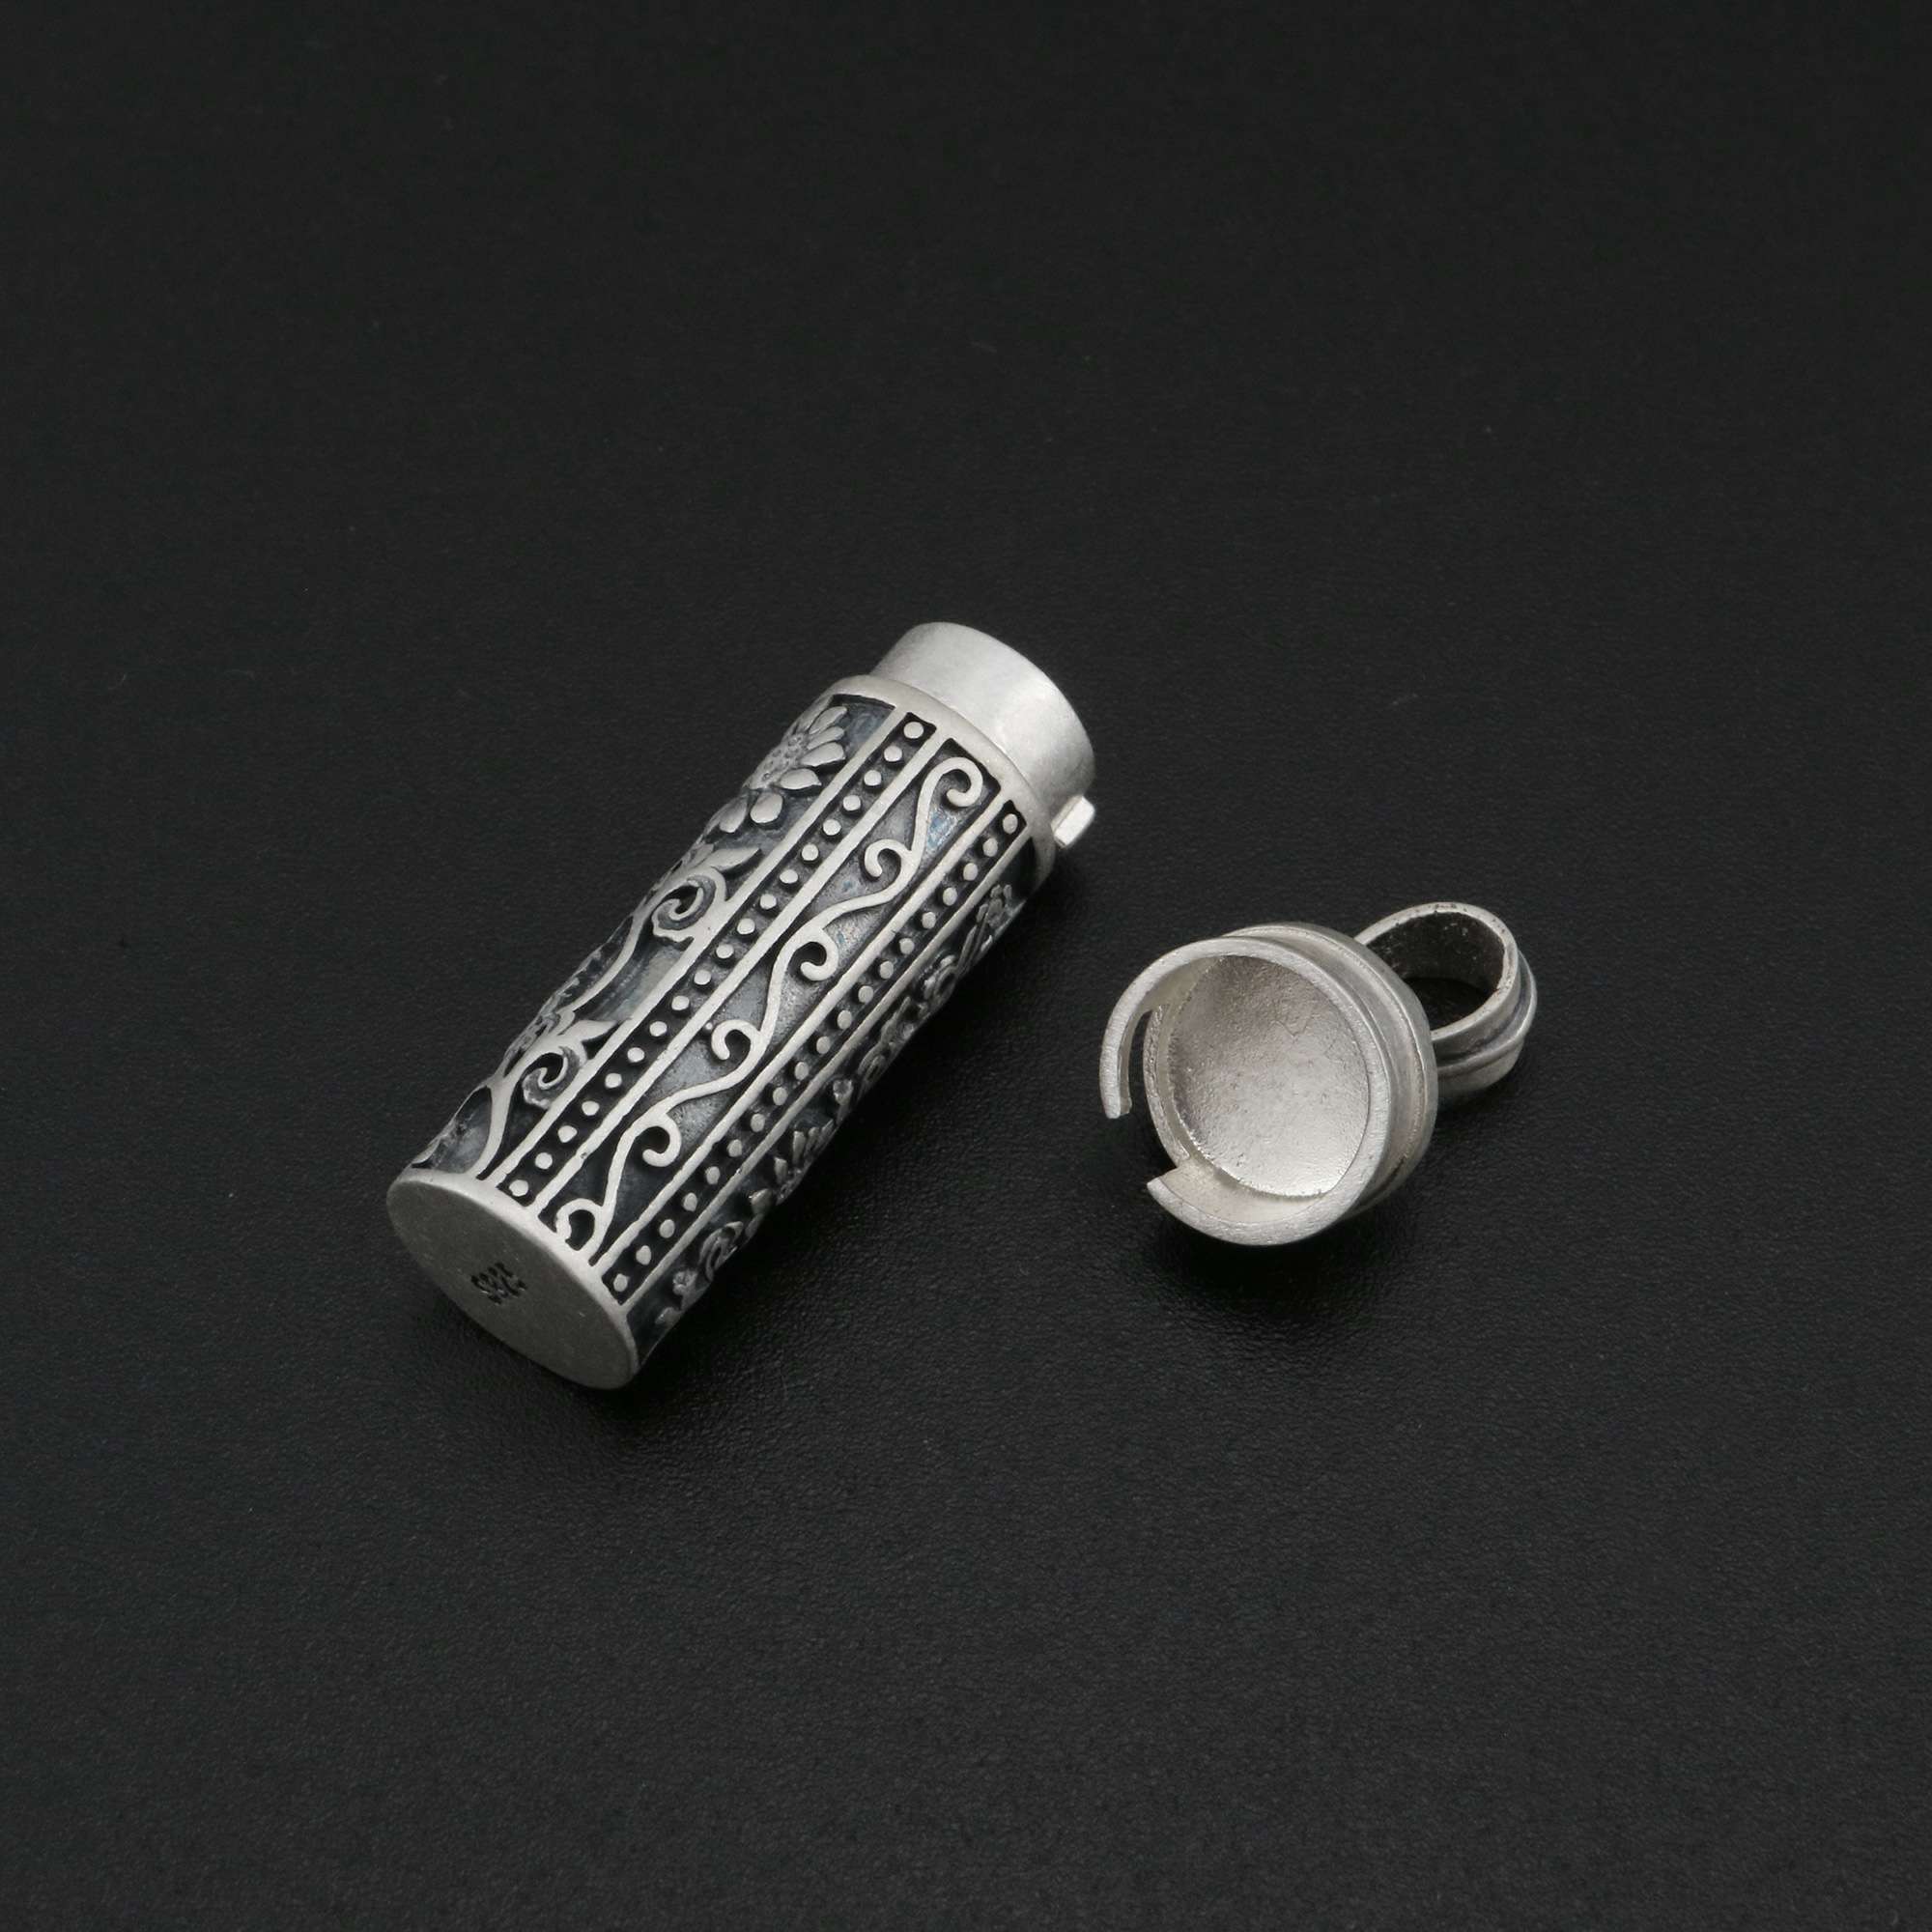 Tube Keepsake Ash Canister Cremation Urn Solid 925 Sterling Silver Wish Vial Pendant Prayer Box Antiqued Silver 10x30MM 1190027 - Click Image to Close